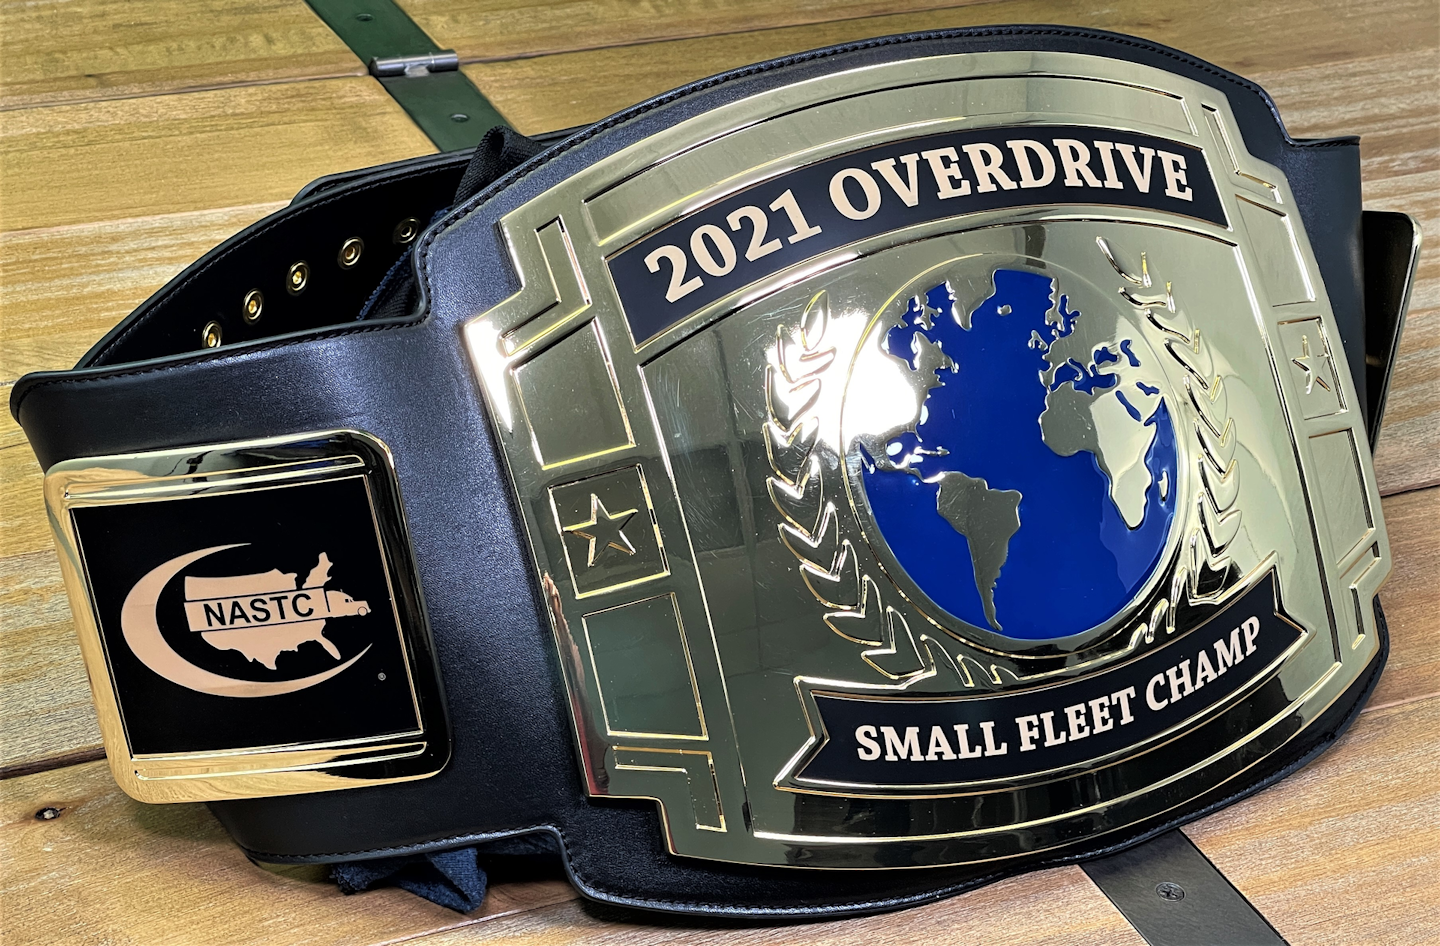 The vaunted Small Fleet Champ title belt will go to the winner of this year's competition next week in Nashville.